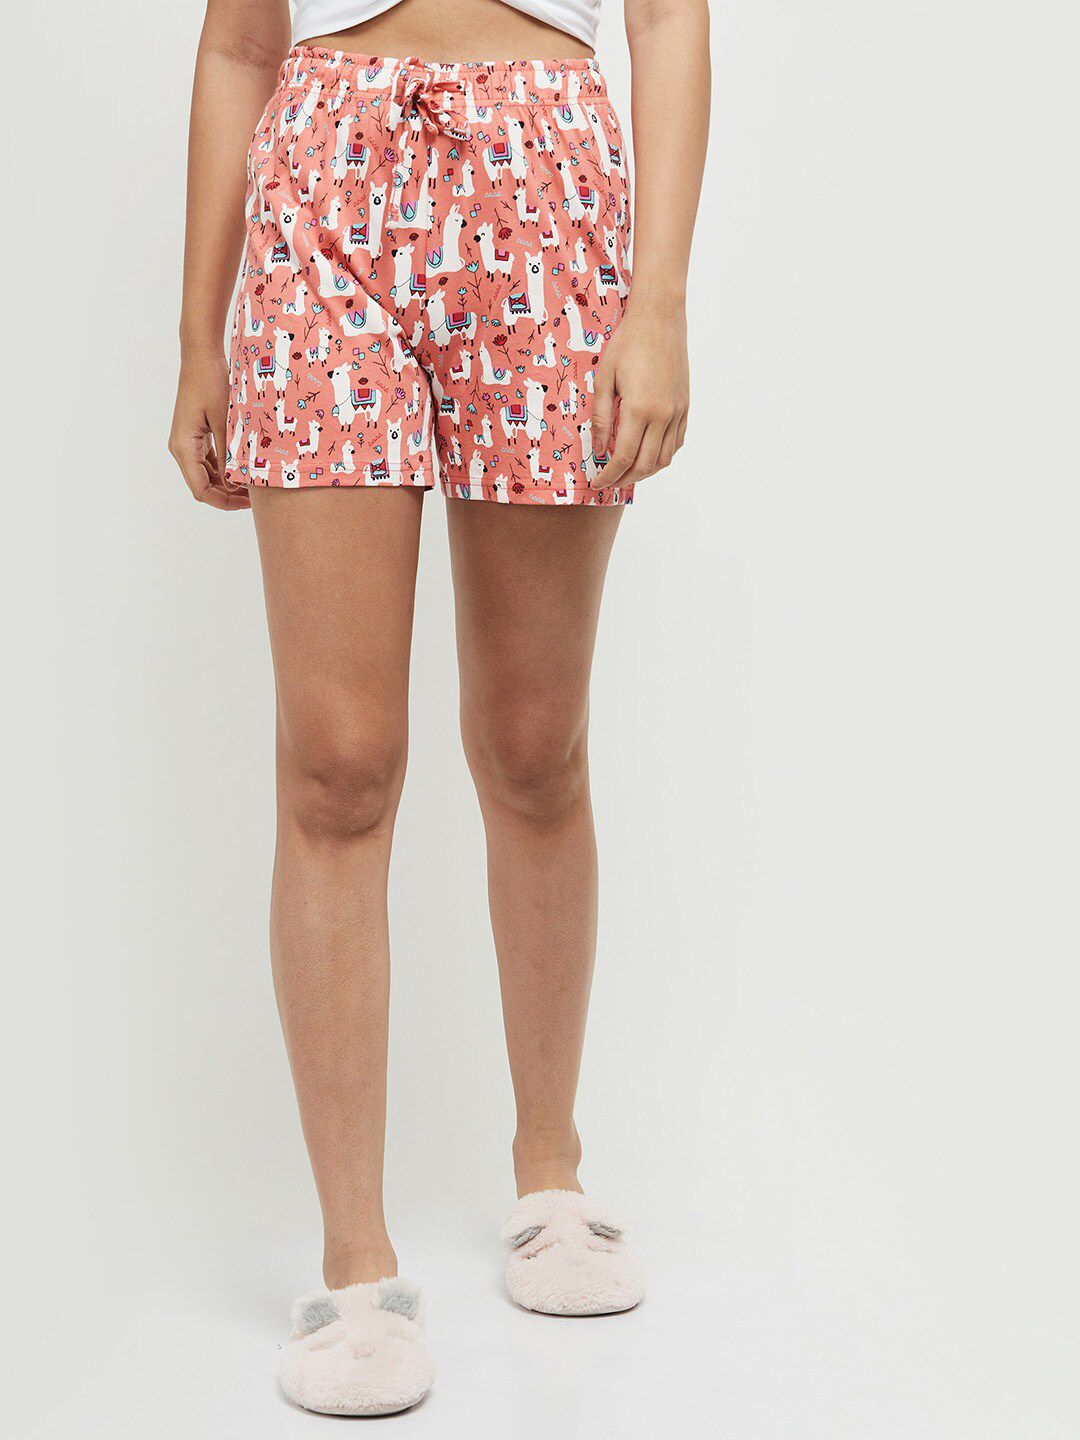 max Women Cotton Peach-Coloured & White Printed Lounge Shorts Price in India